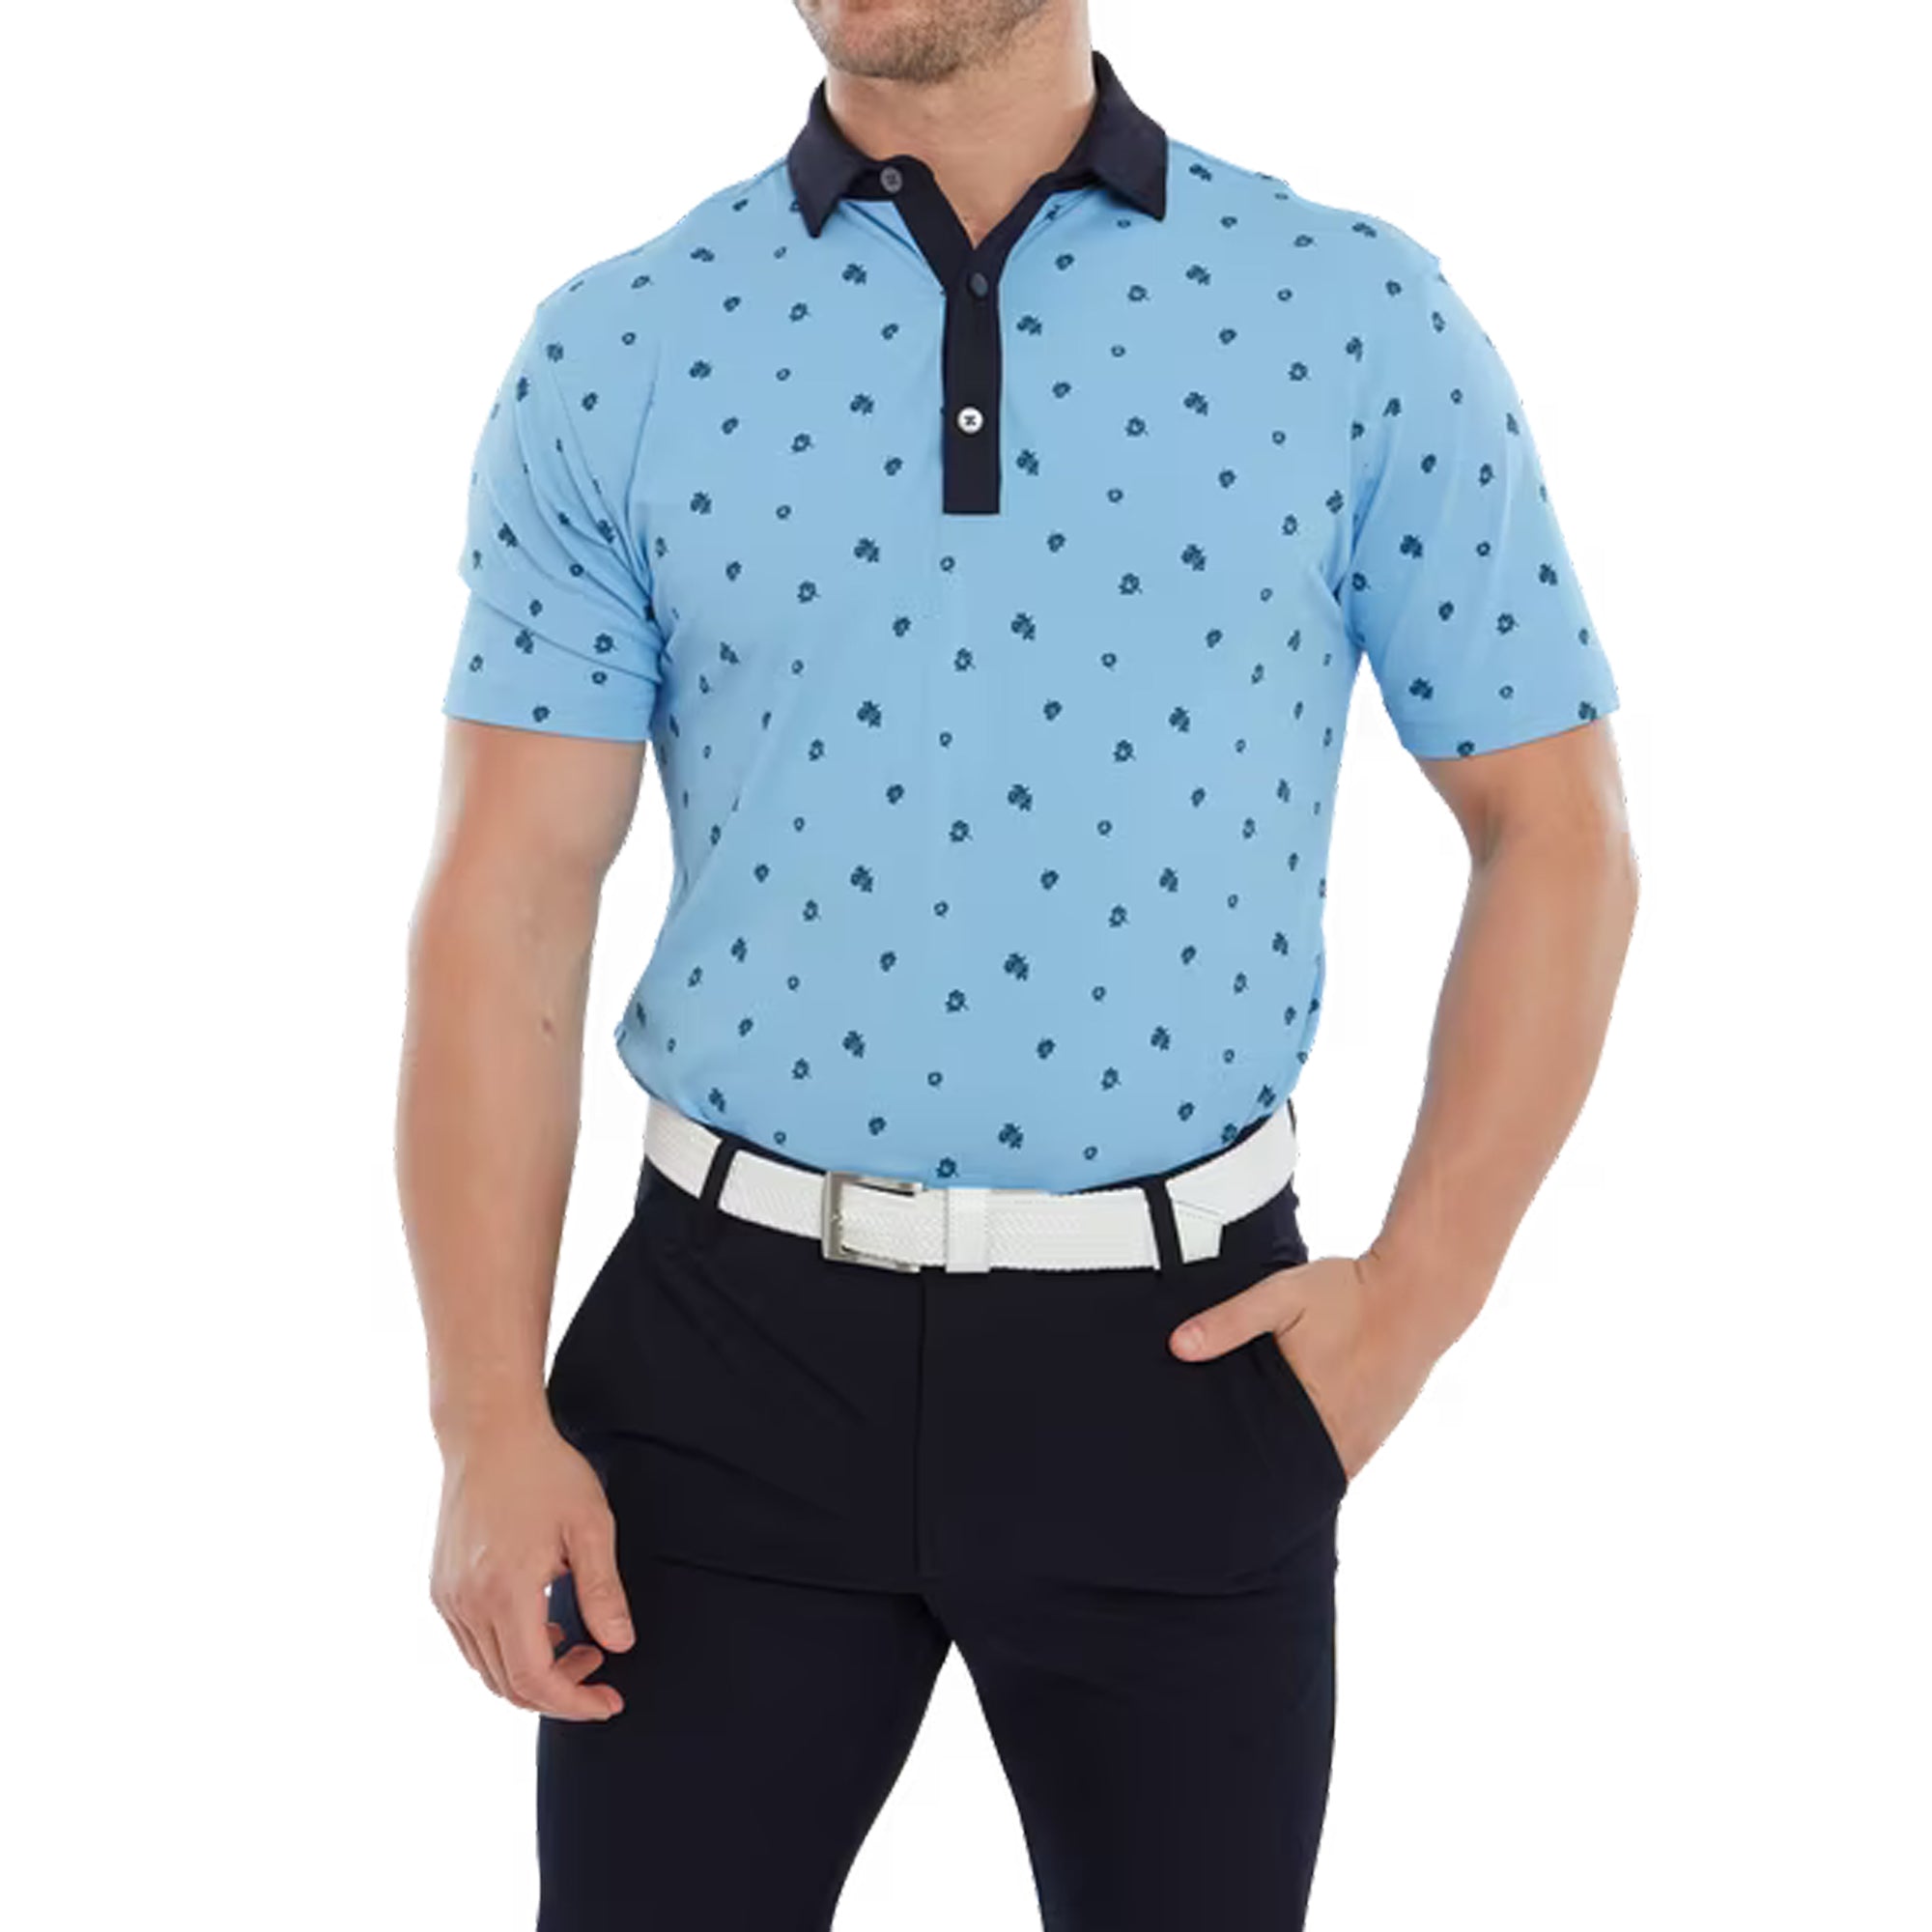 FootJoy Scattered Floral Pique Polo